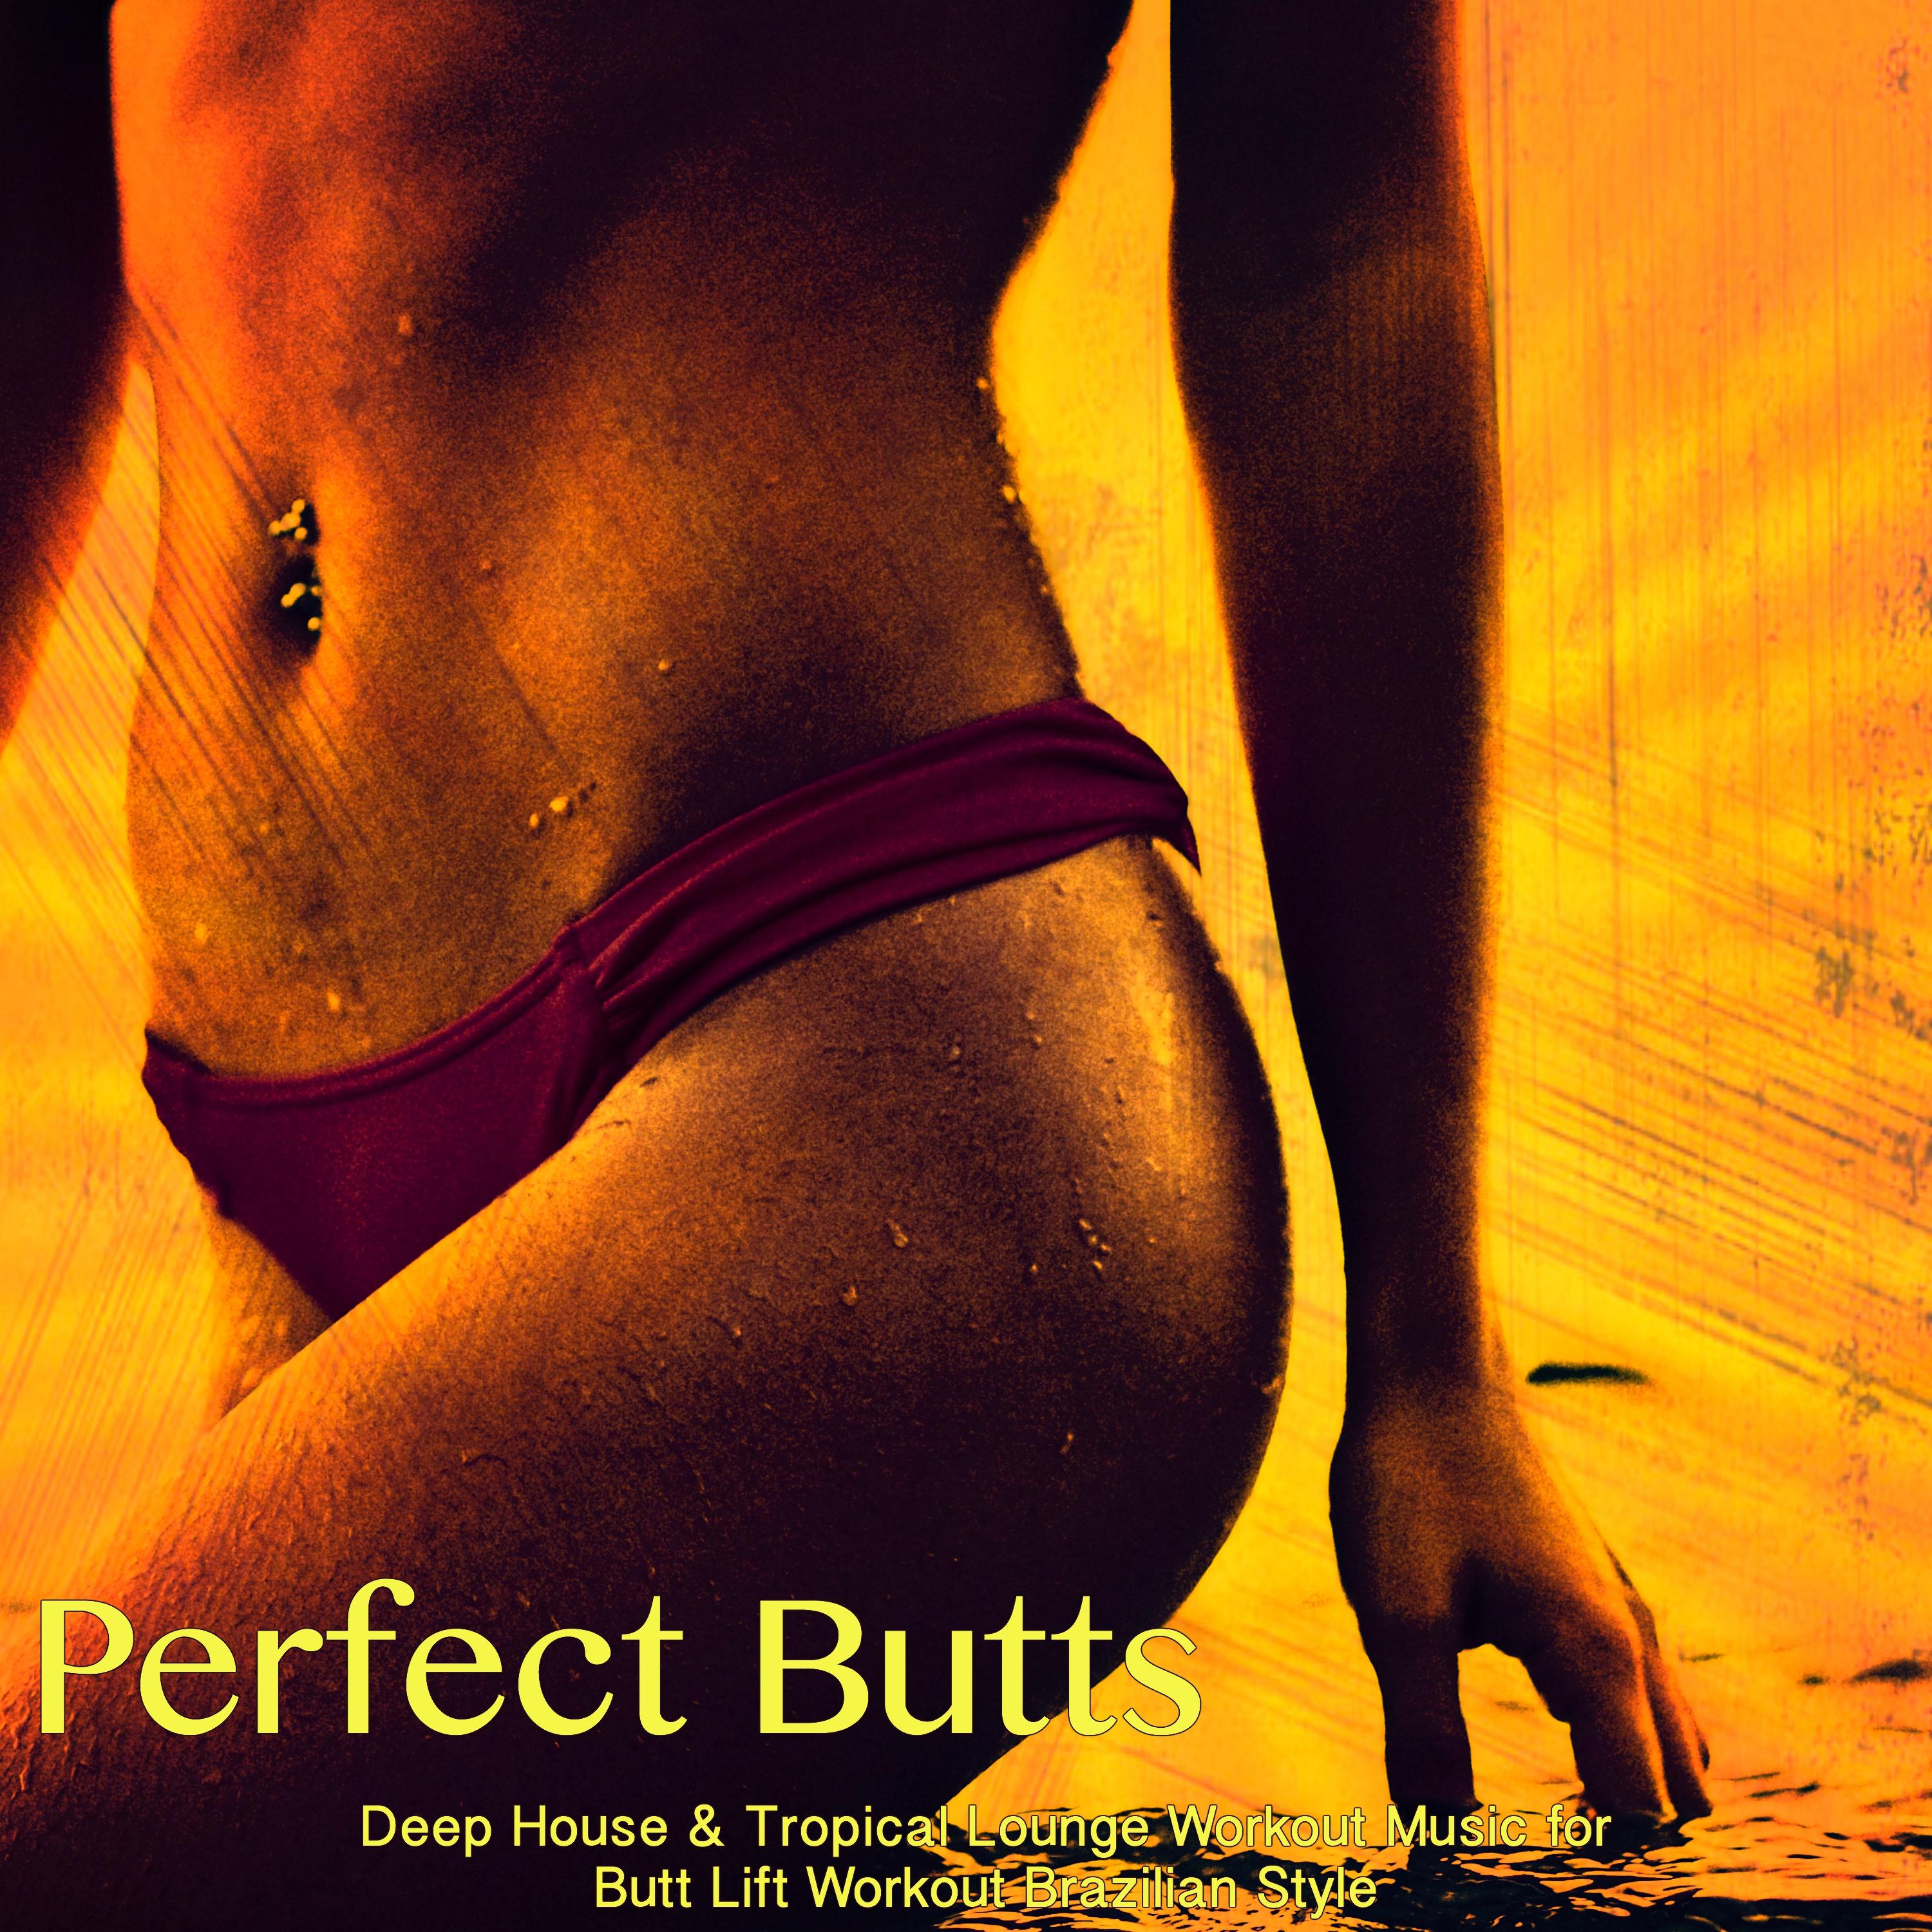 Perfect Butts – Deep House & Tropical Lounge Workout Music for Butt Lift Workout Brazilian Style